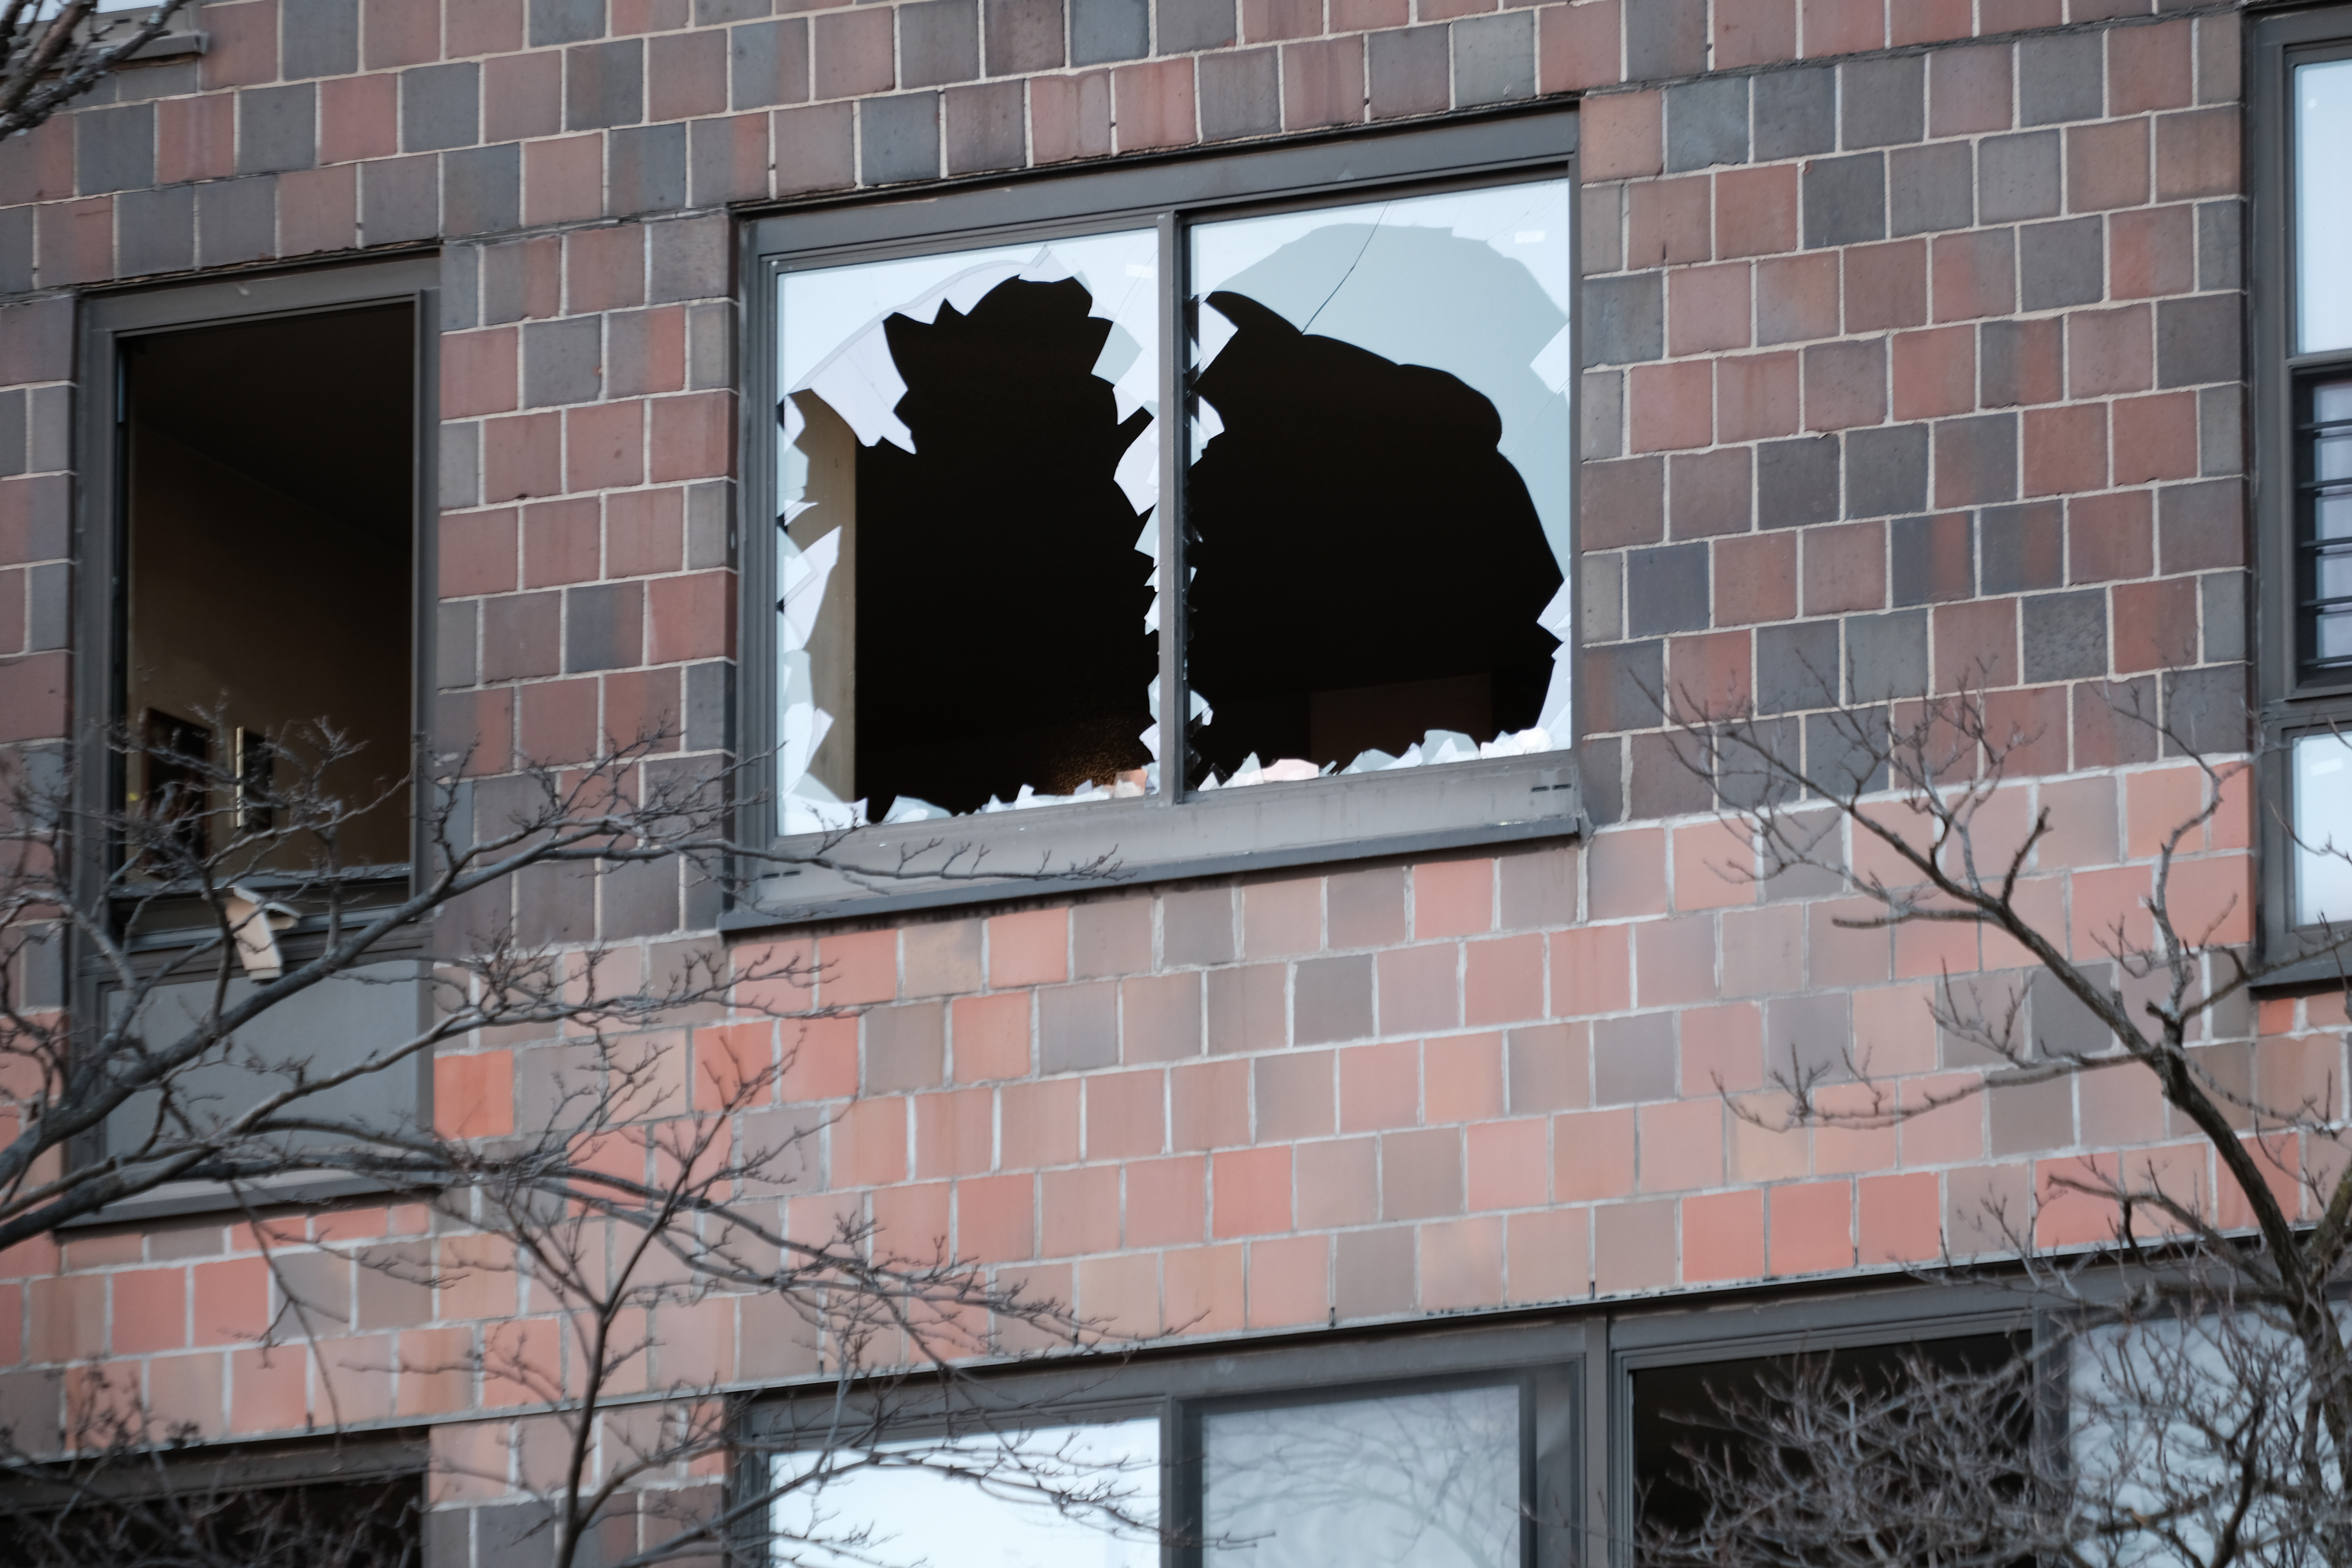 Broken windows are seen at a Bronx apartment building a day after a deadly fire swept through on Sunday.